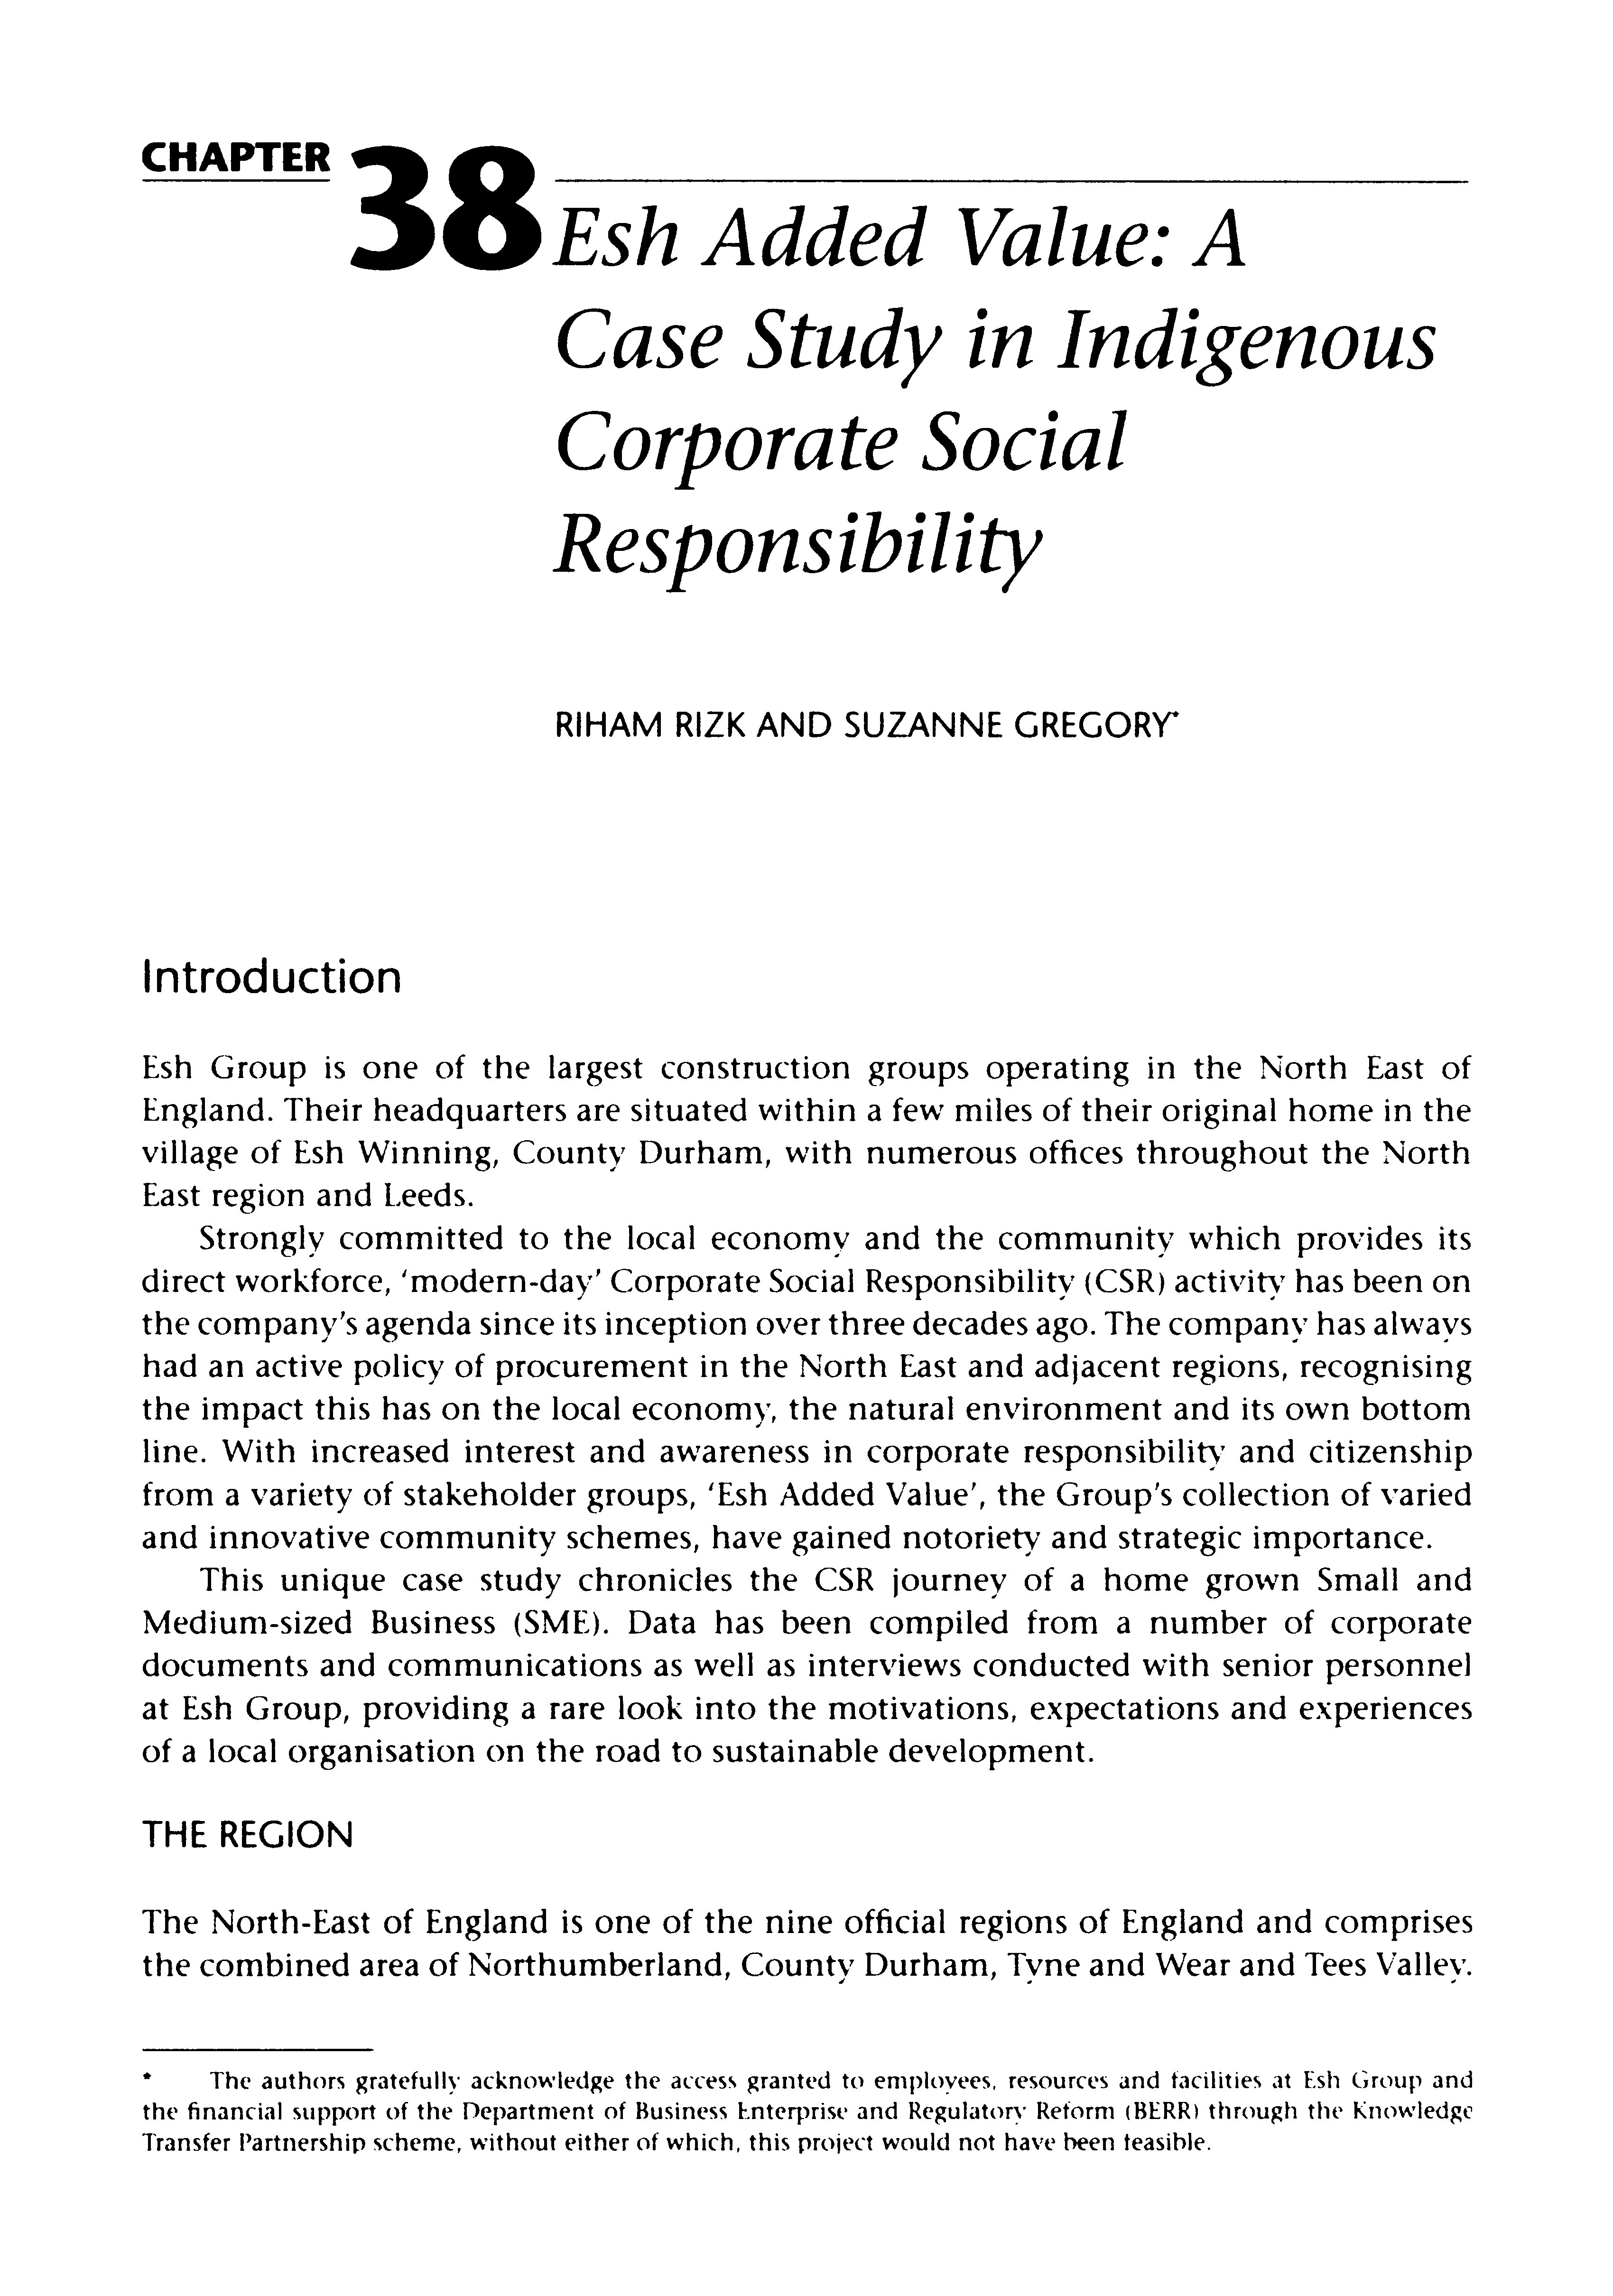 Esh Added Value: A Case Study in Indigenous Corporate Social Responsibility Thumbnail